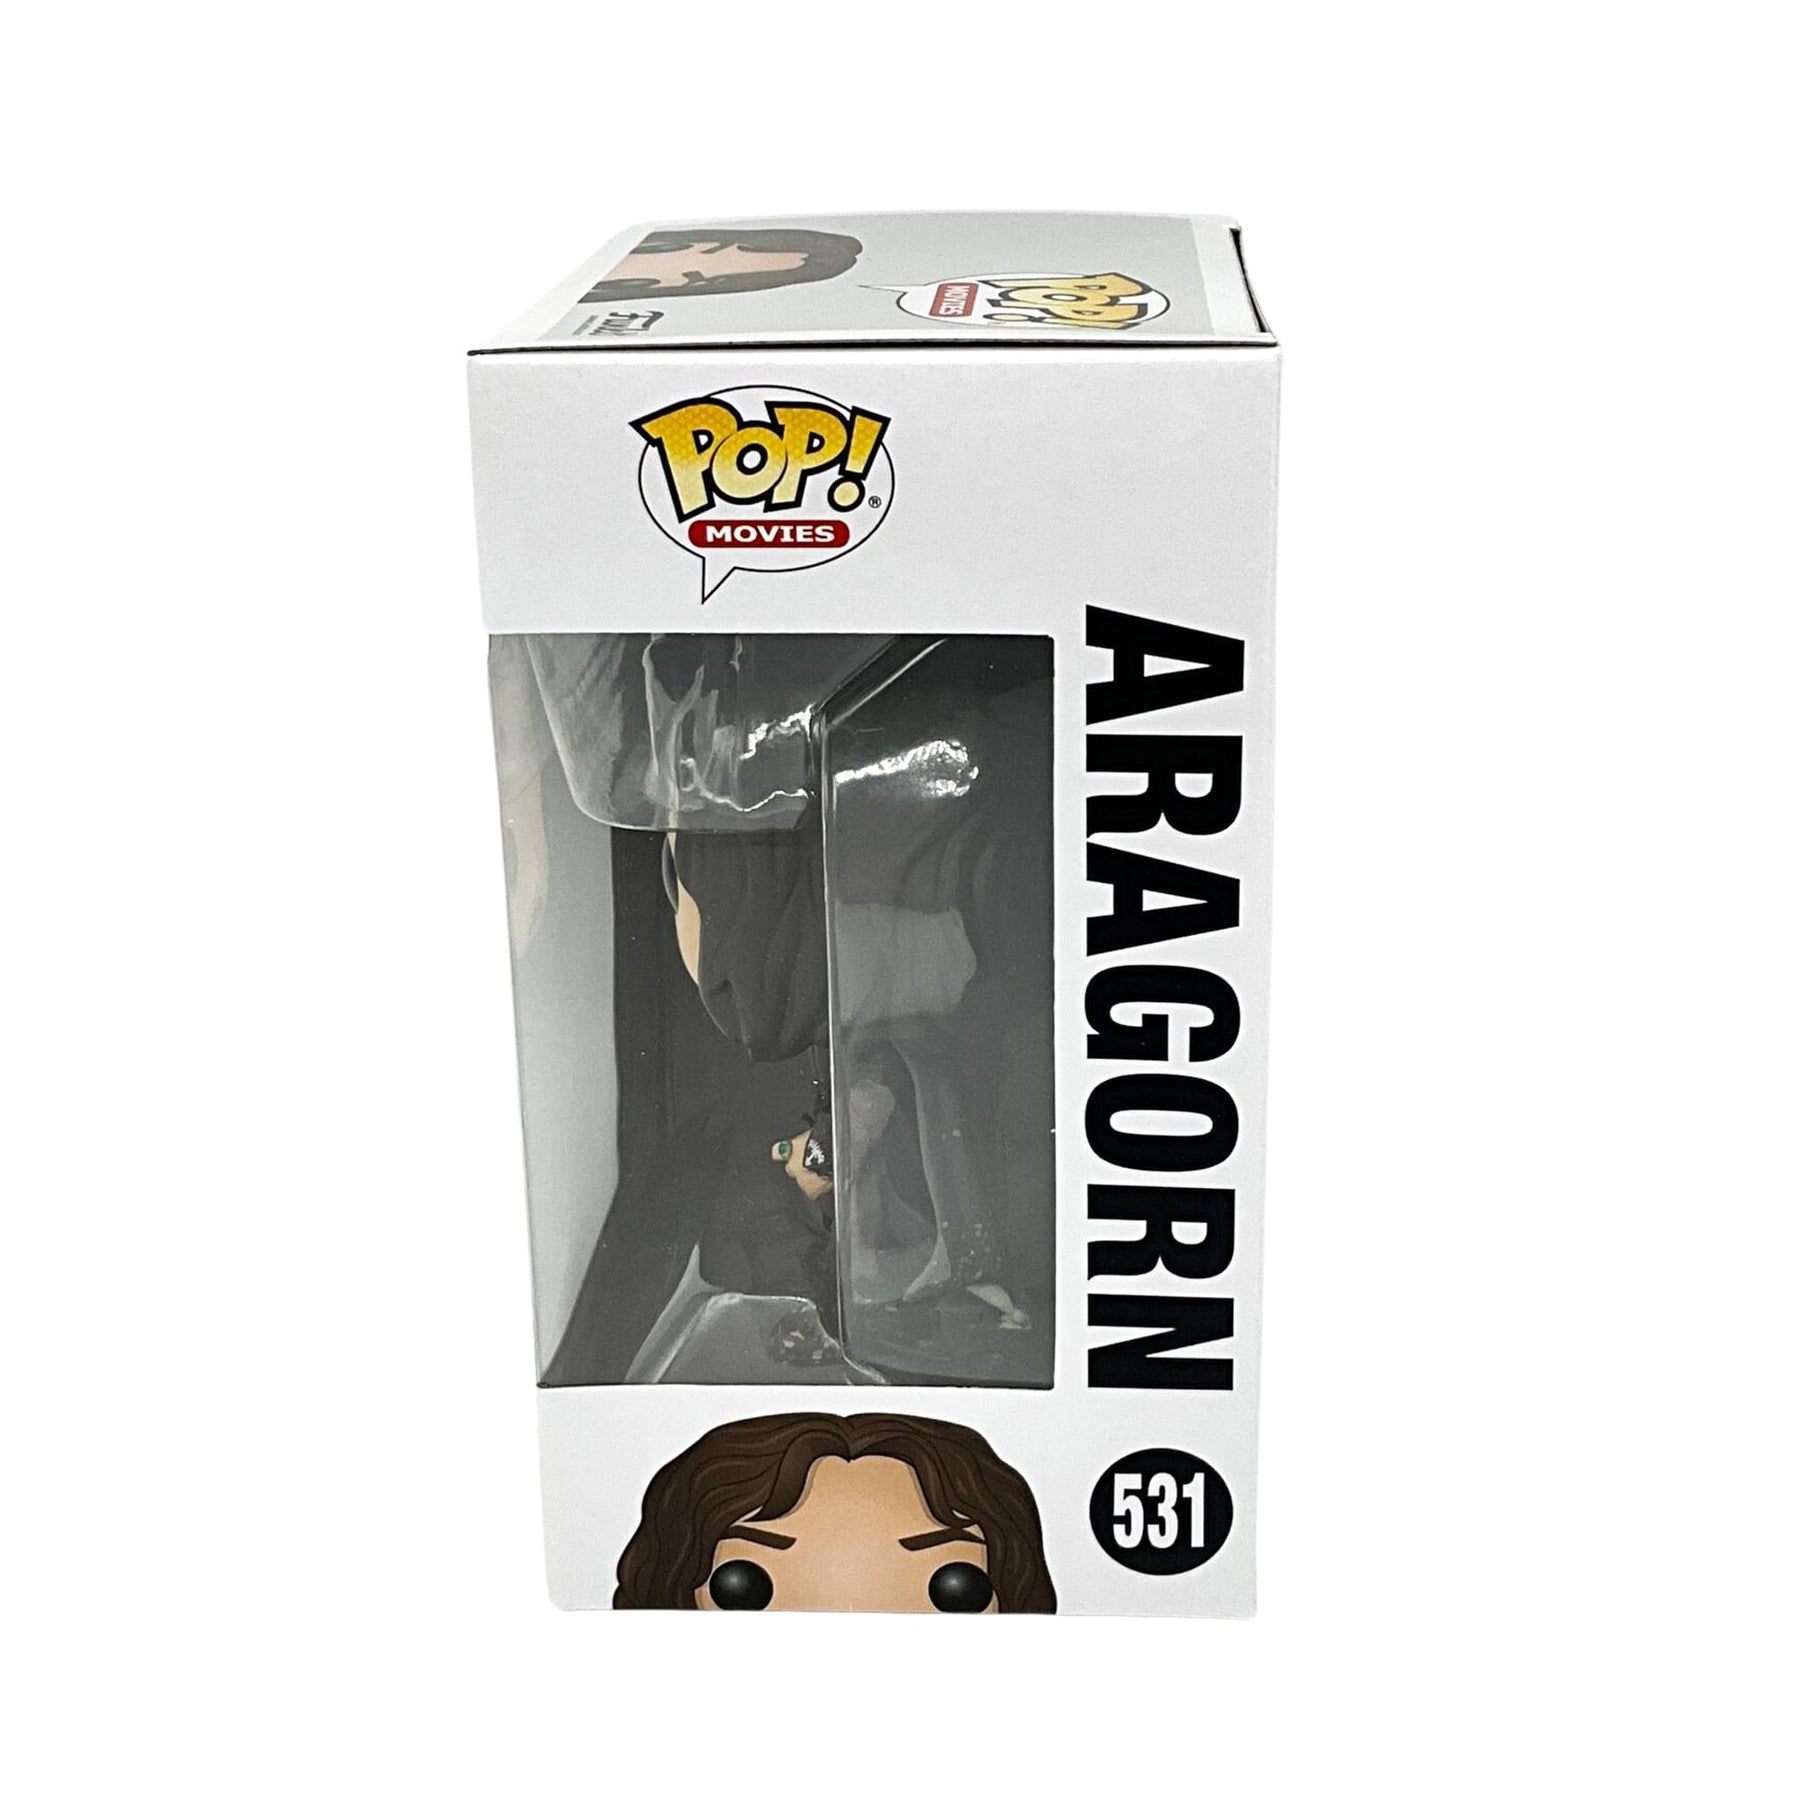 The Lord of the Rings Funko POP | Aragorn